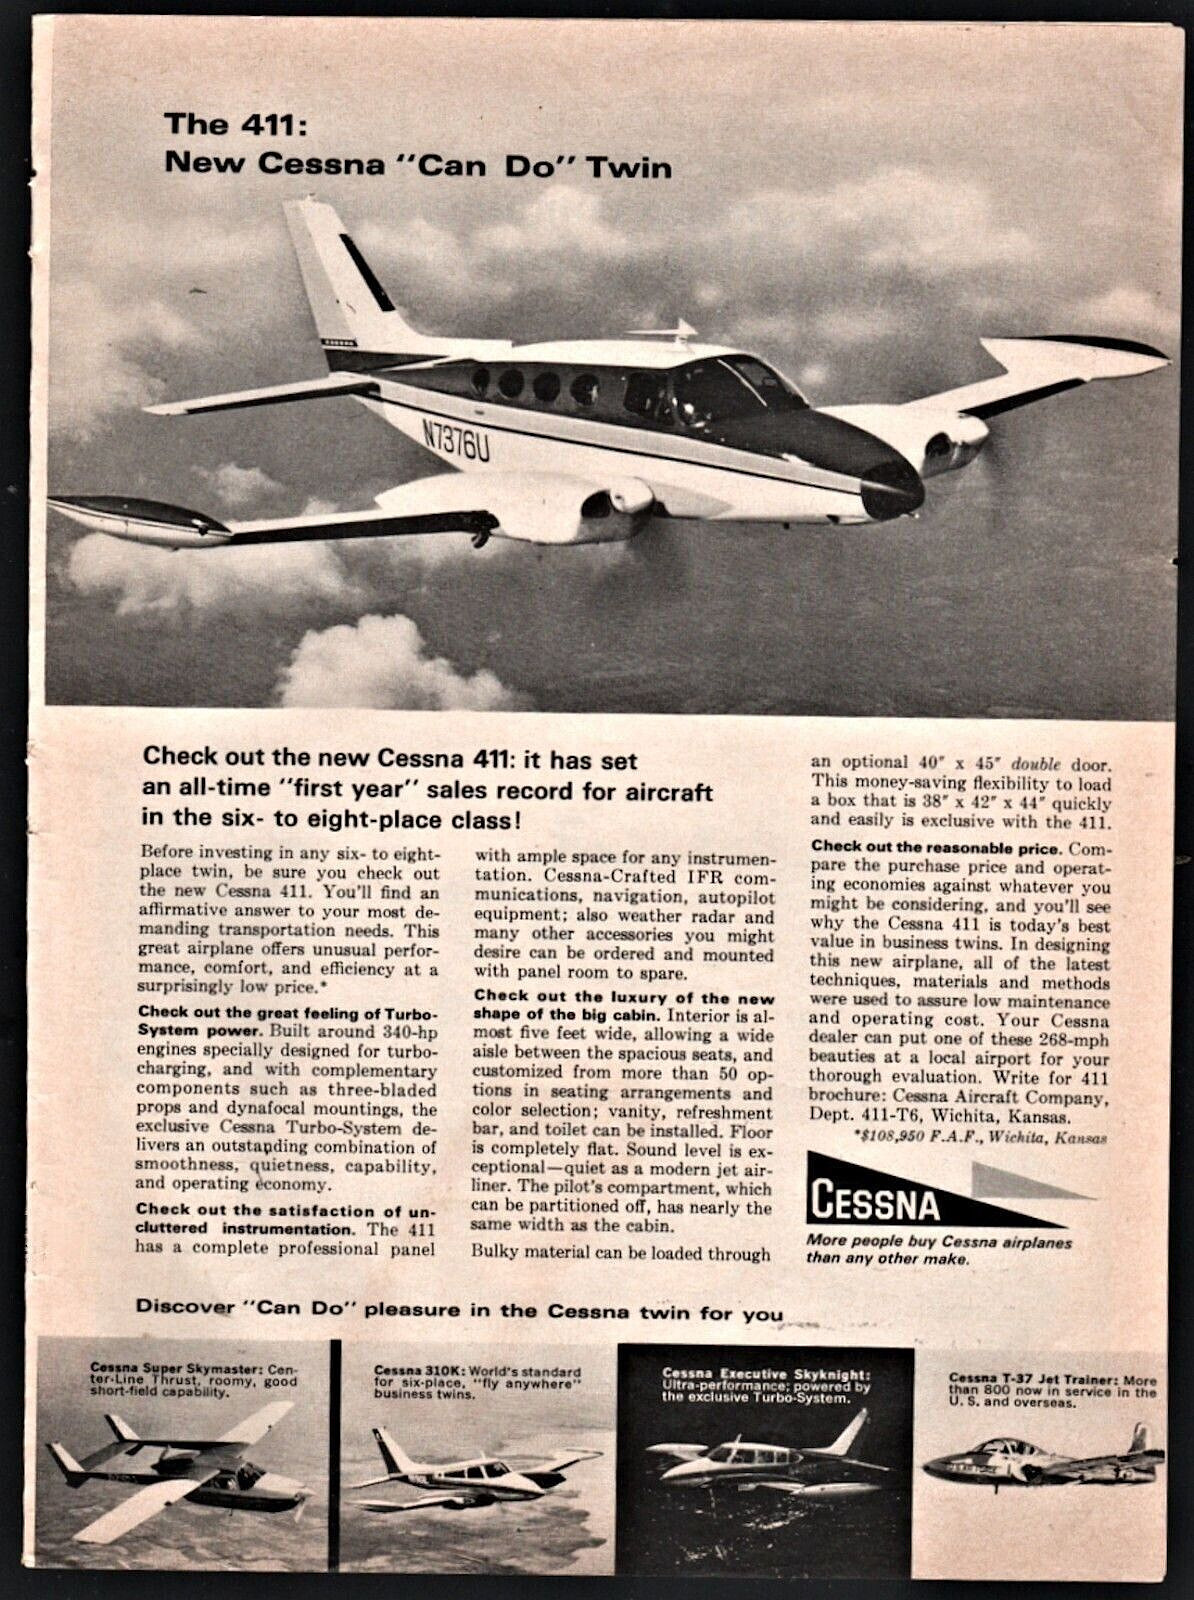 1966 CESSNA 411 Aircraft Vintage Plane Airplane AD Aviation Advertising